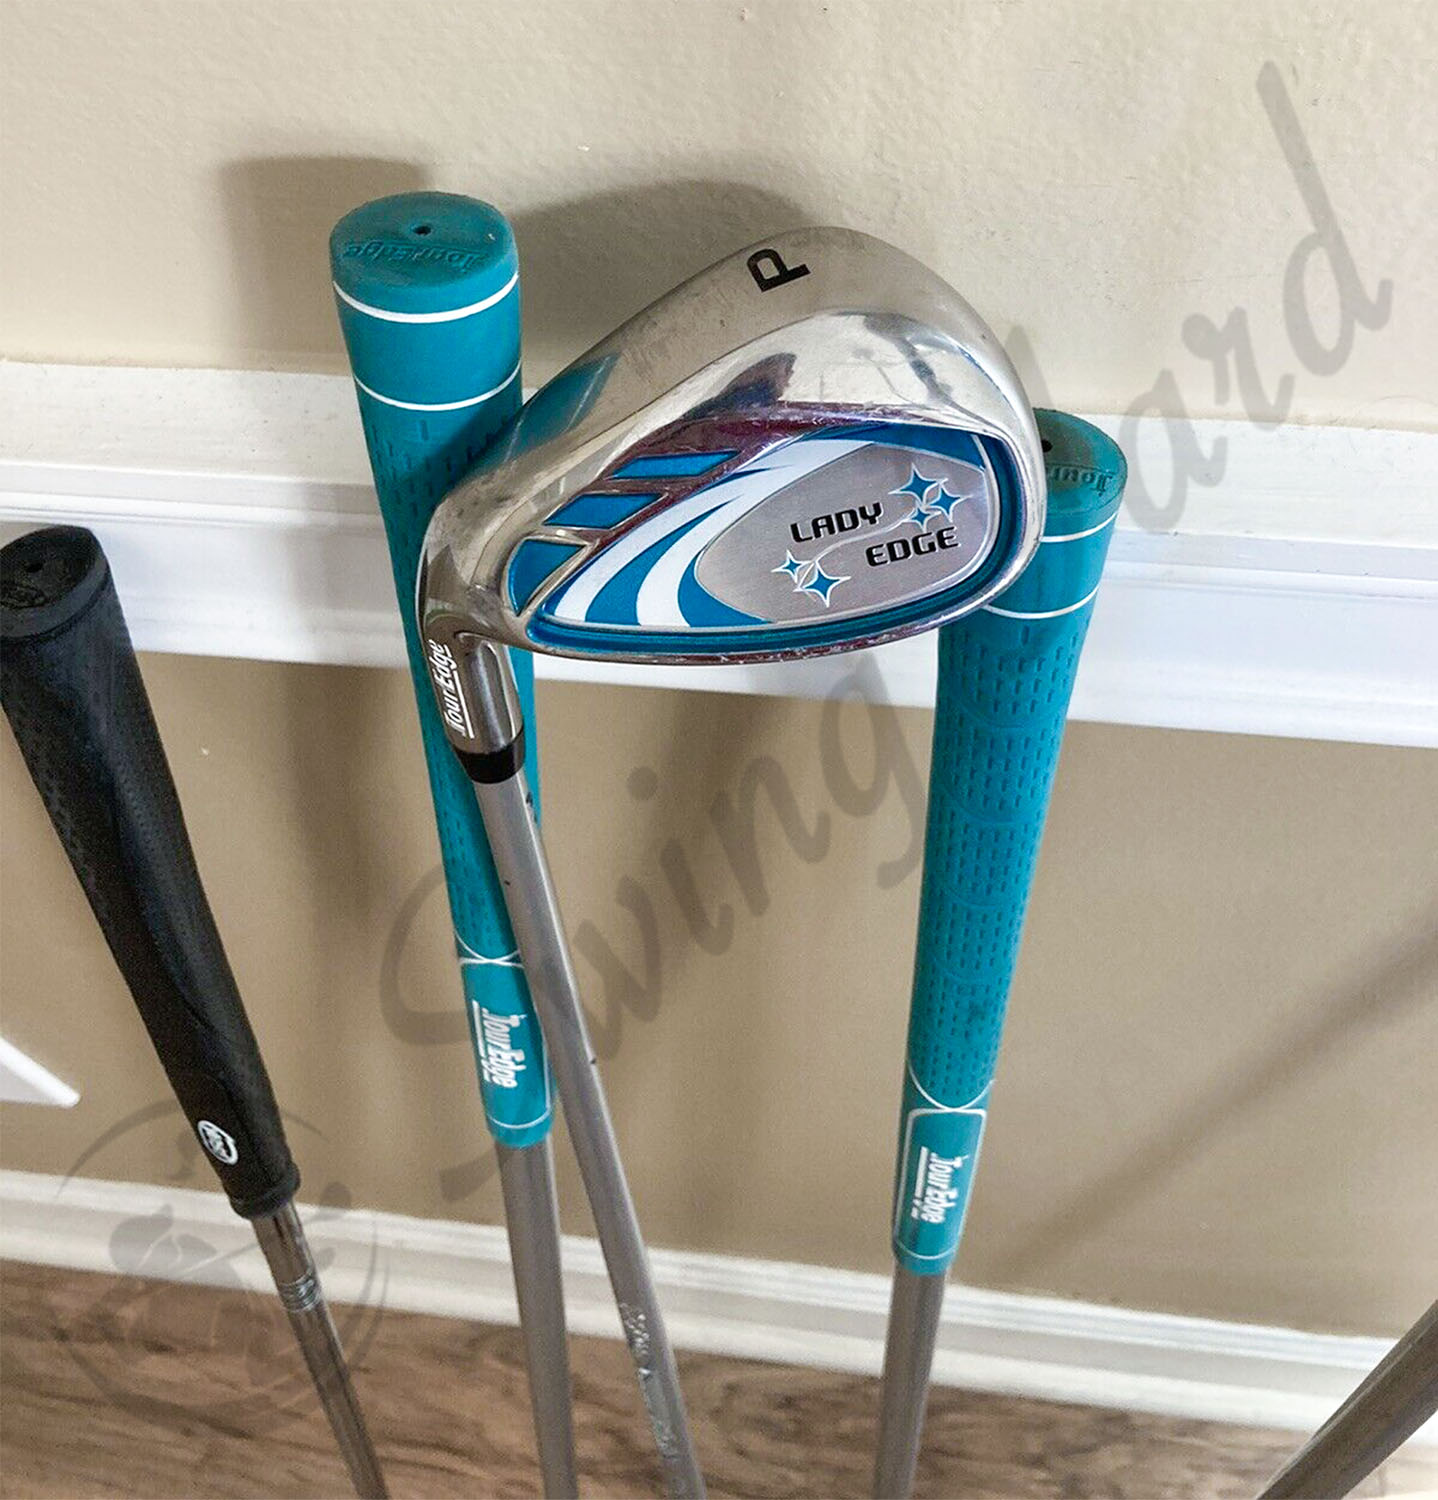 The Tour Edge Lady Edge pitching wedge in the living room